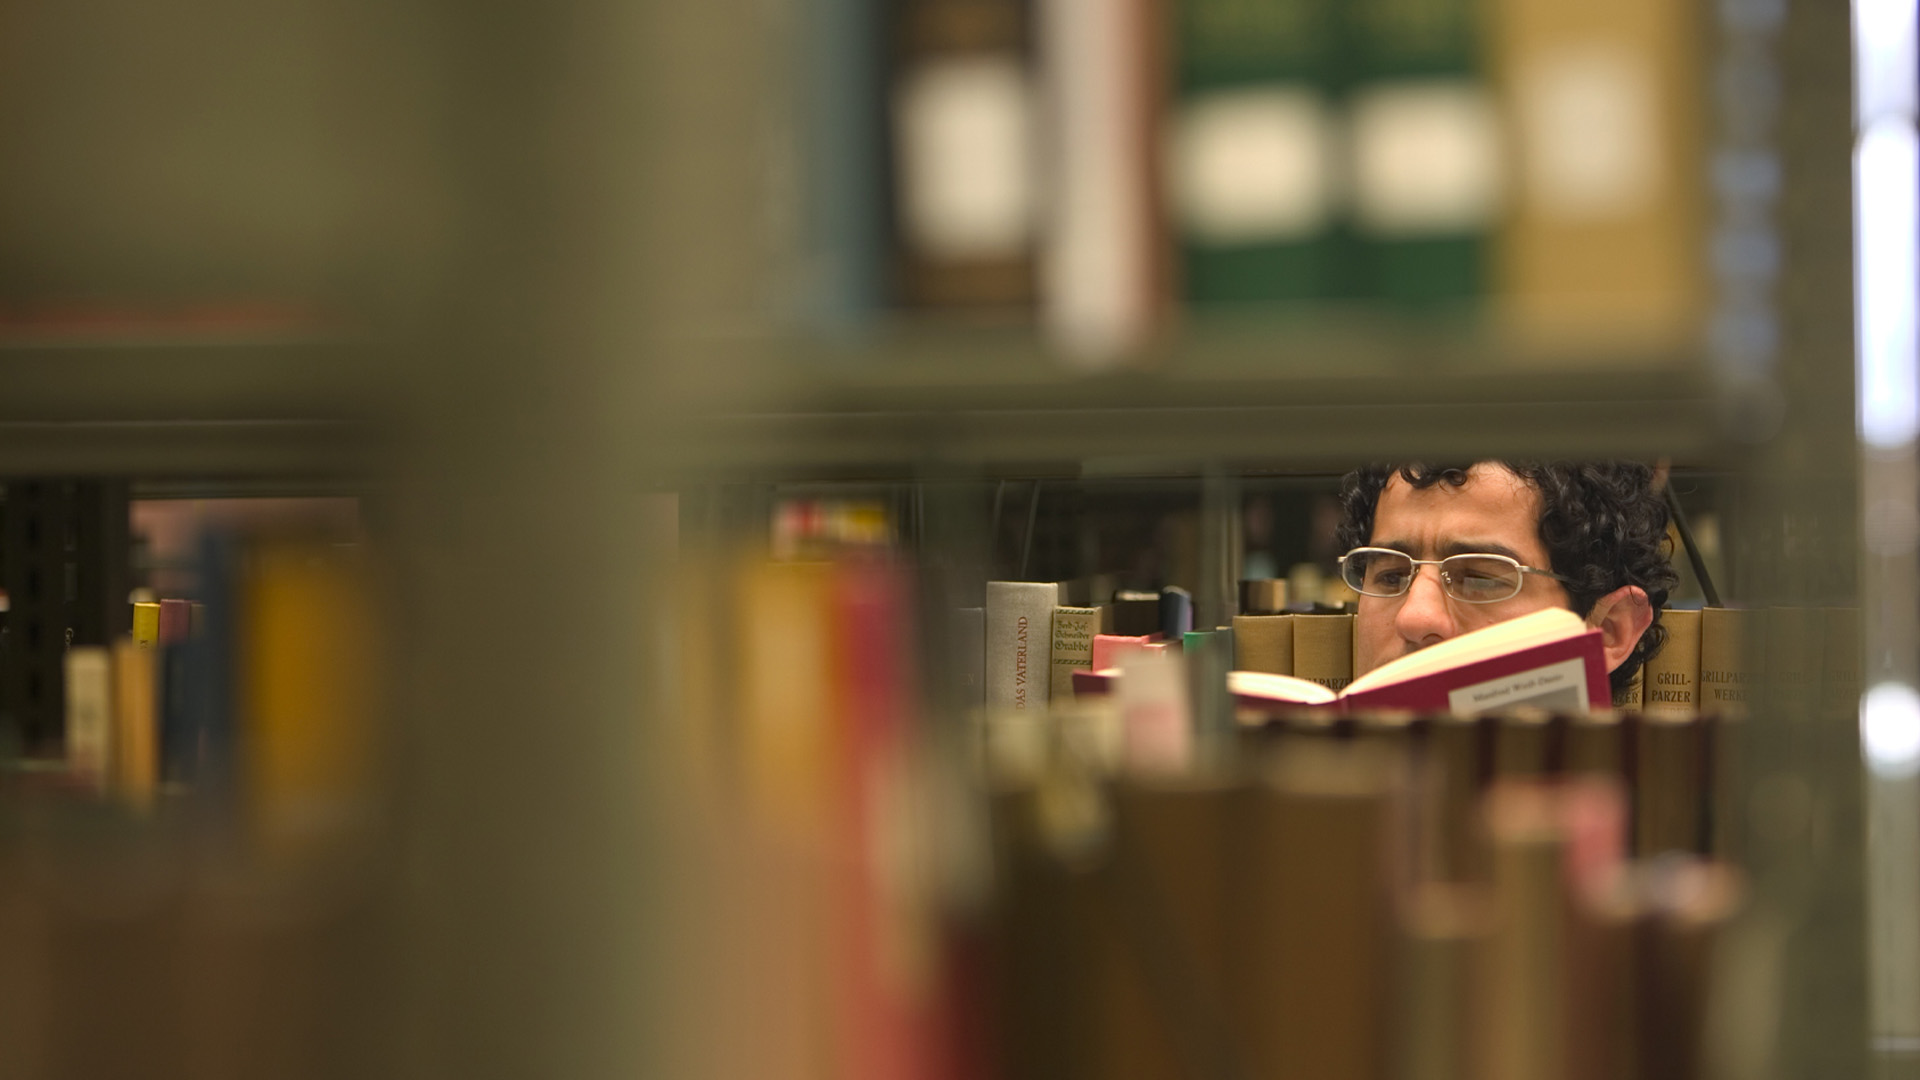 Man reading book in library stacks